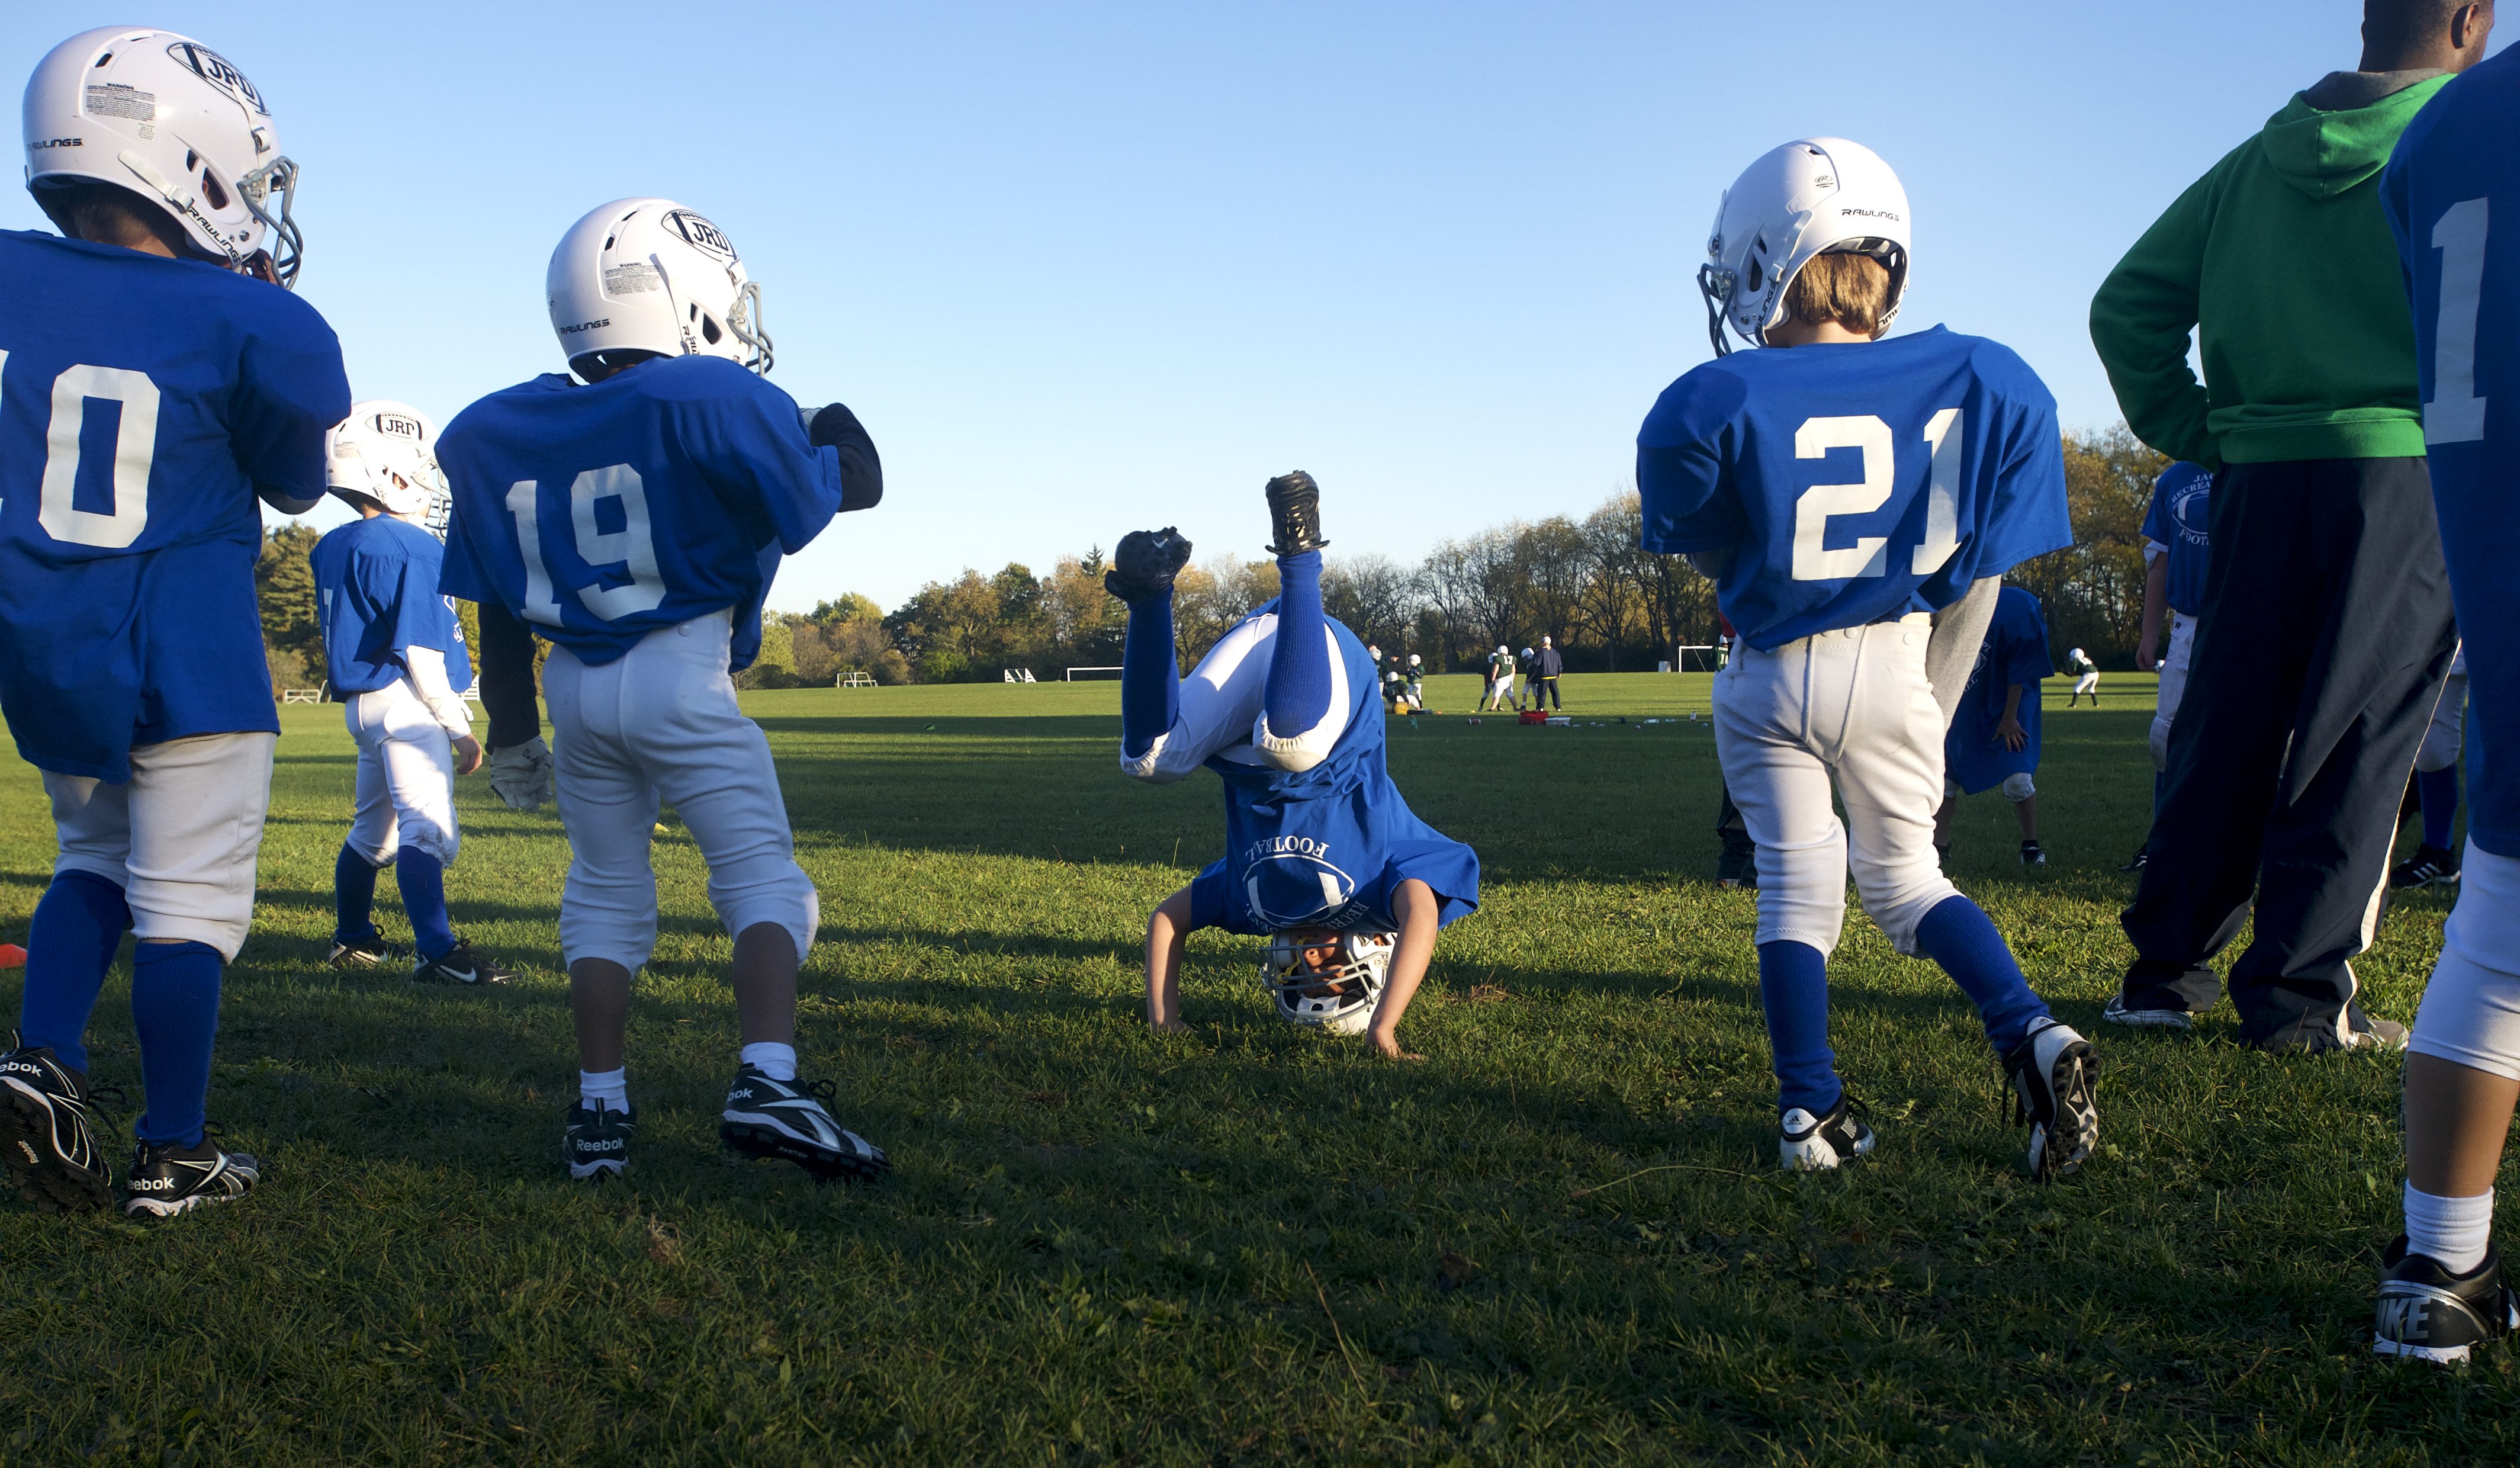 Players goof off before the snap at the Lions 3rd and 4th grade football practice in Jackson, Mich. on Monday, October 8, 2012. The Lions are undefeated so far this season.